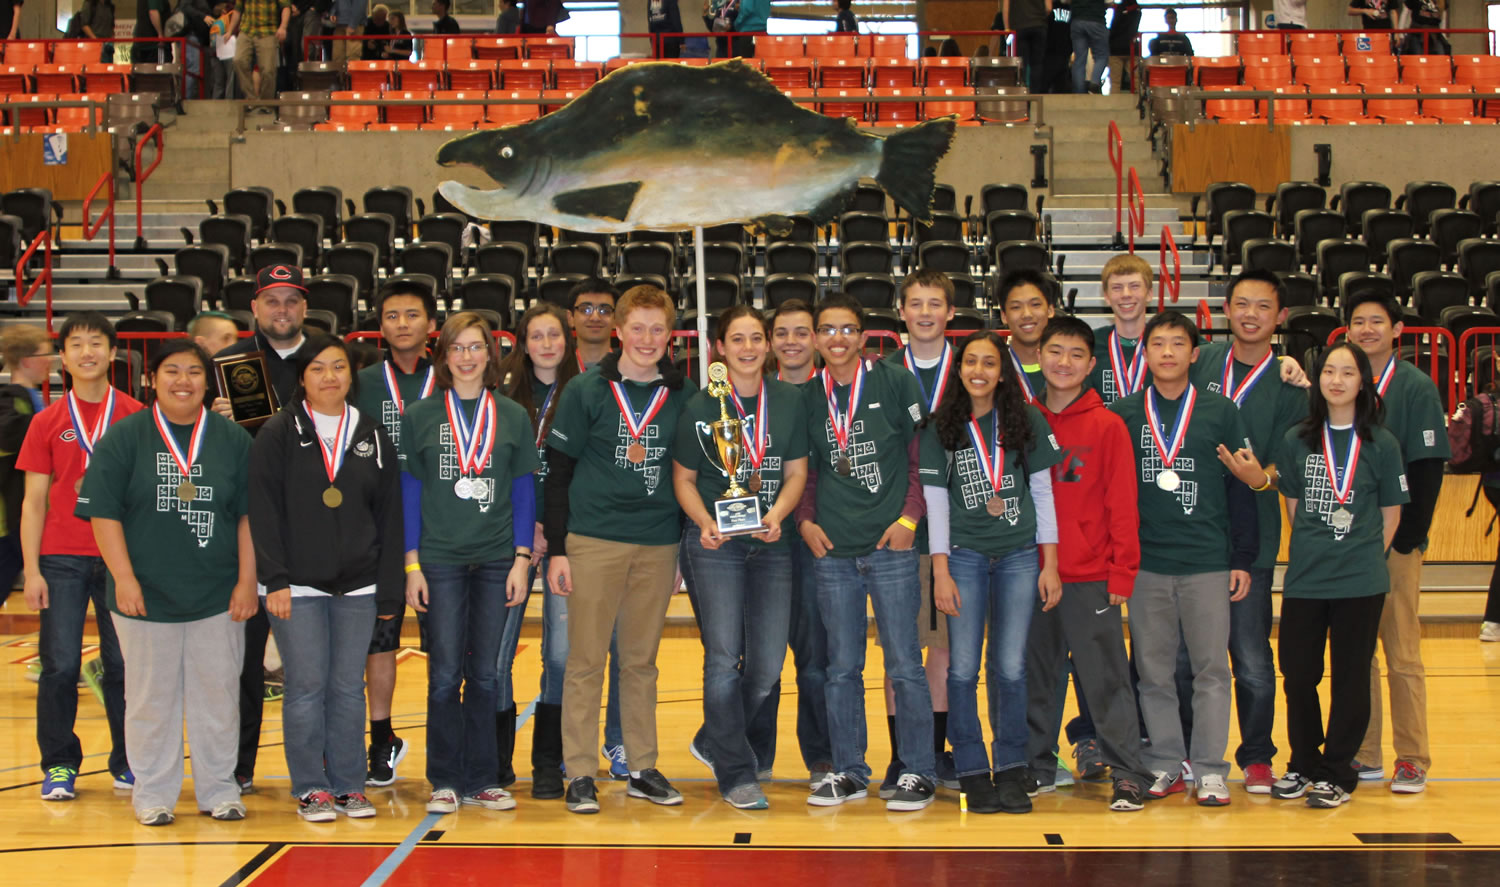 The Camas High School Science Olympiad team members celebrate after earning their fourth consecutive state title on Saturday at Eastern Washington University.